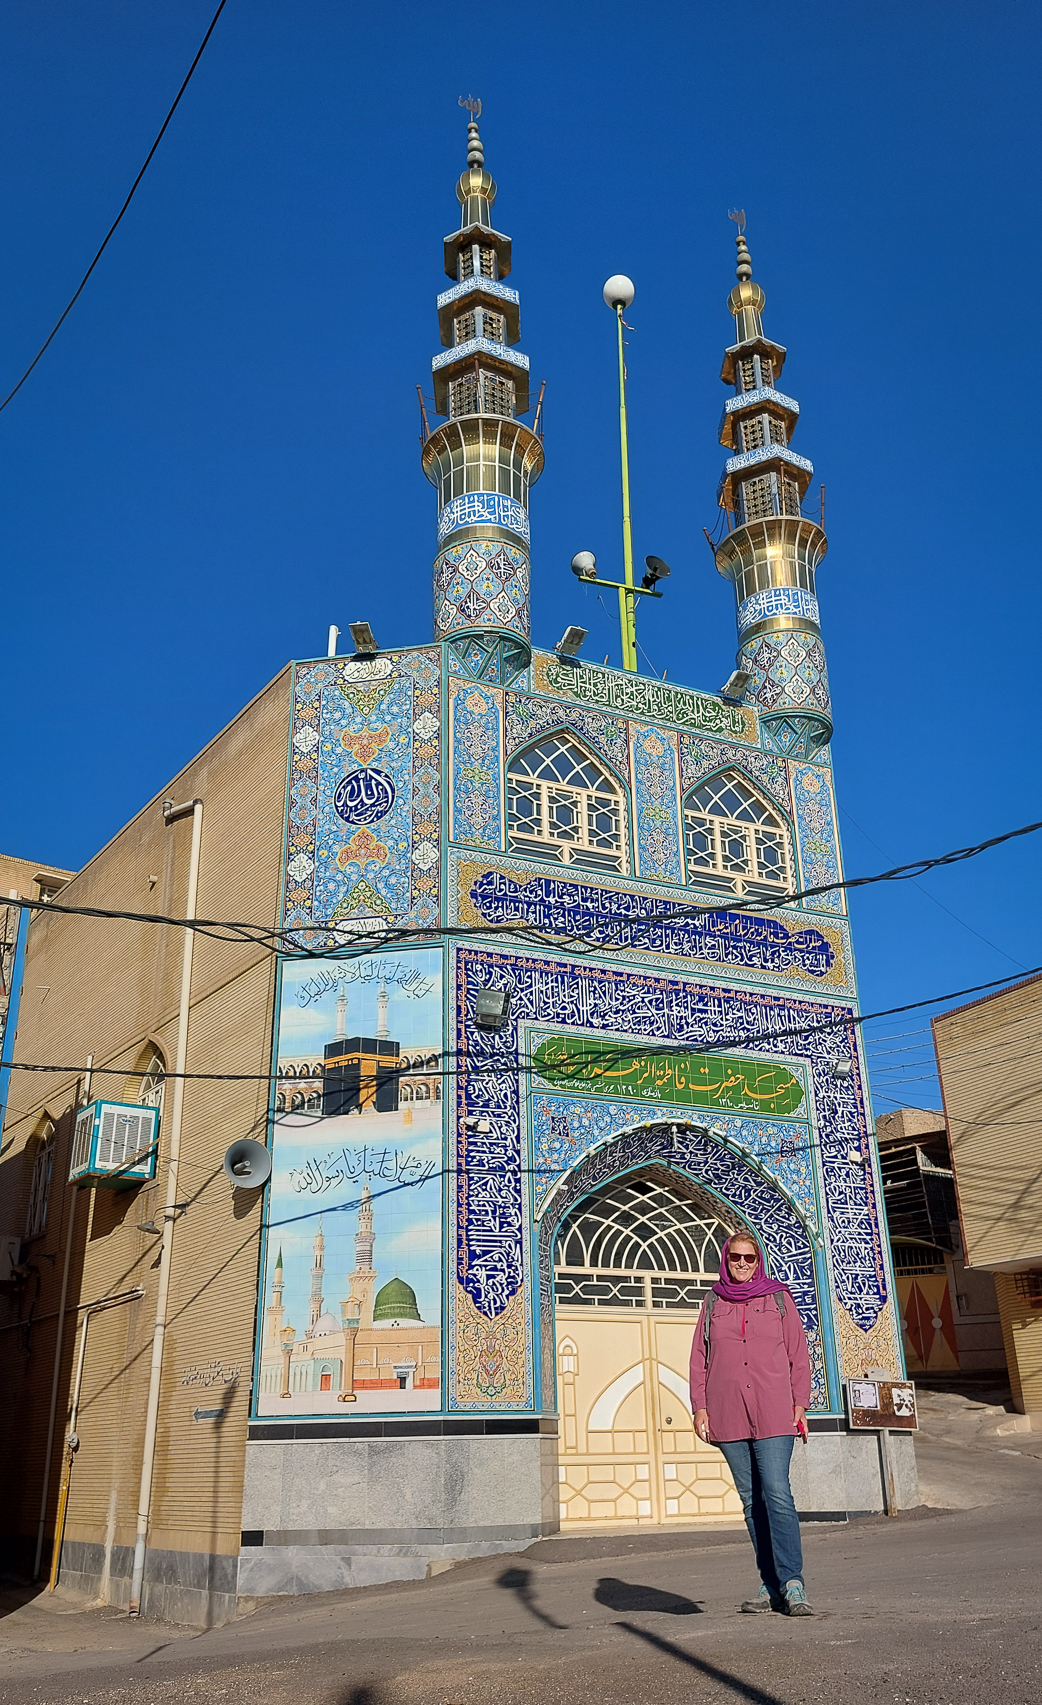 <span  class="uc_style_uc_tiles_grid_image_elementor_uc_items_attribute_title" style="color:#ffffff;">Sightseeing in Dezful</span>